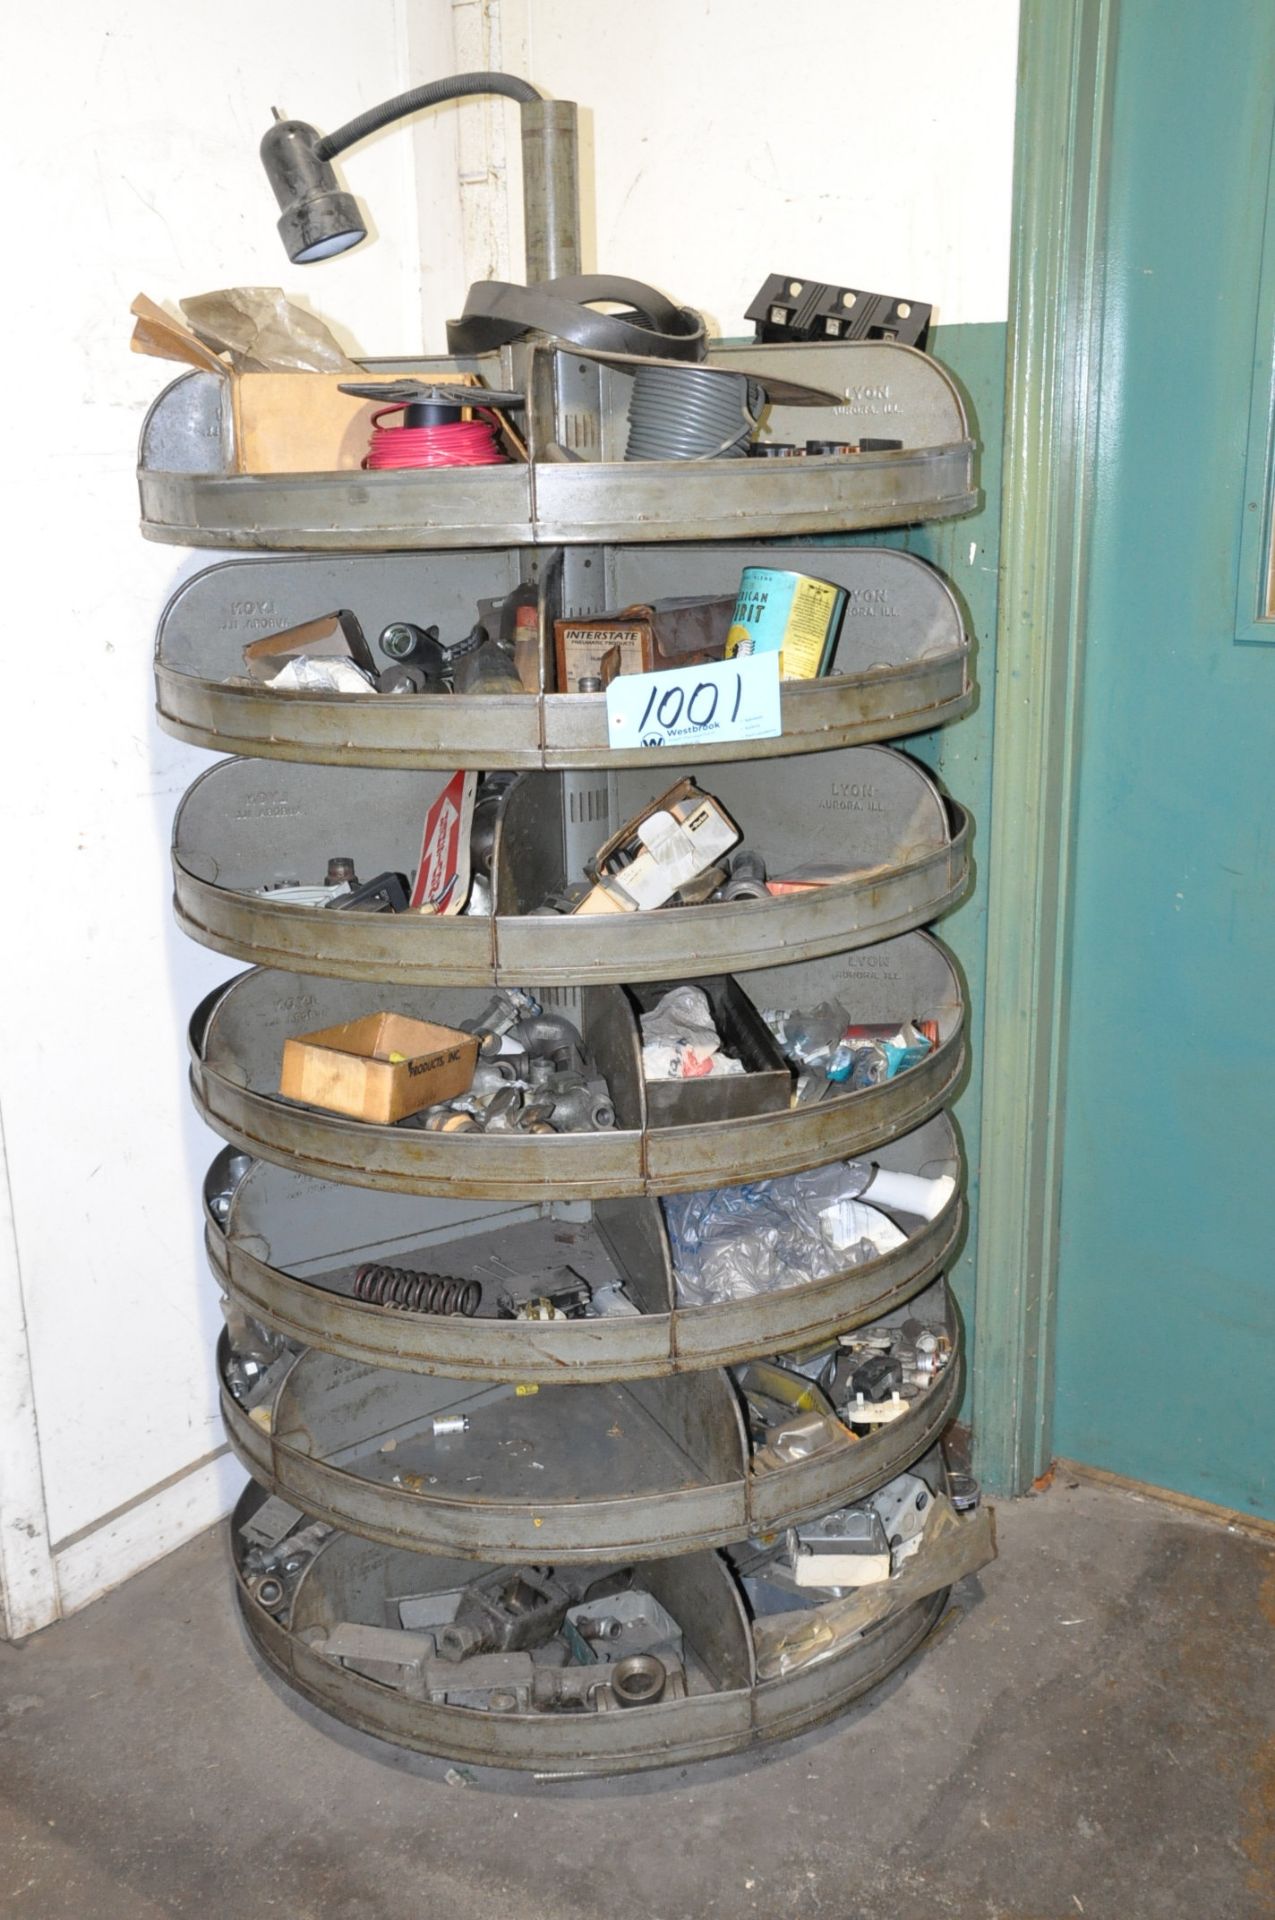 Lot-(2) Portable Parts Bin Racks with Heli-Coil Parts, Bolts, Etc.